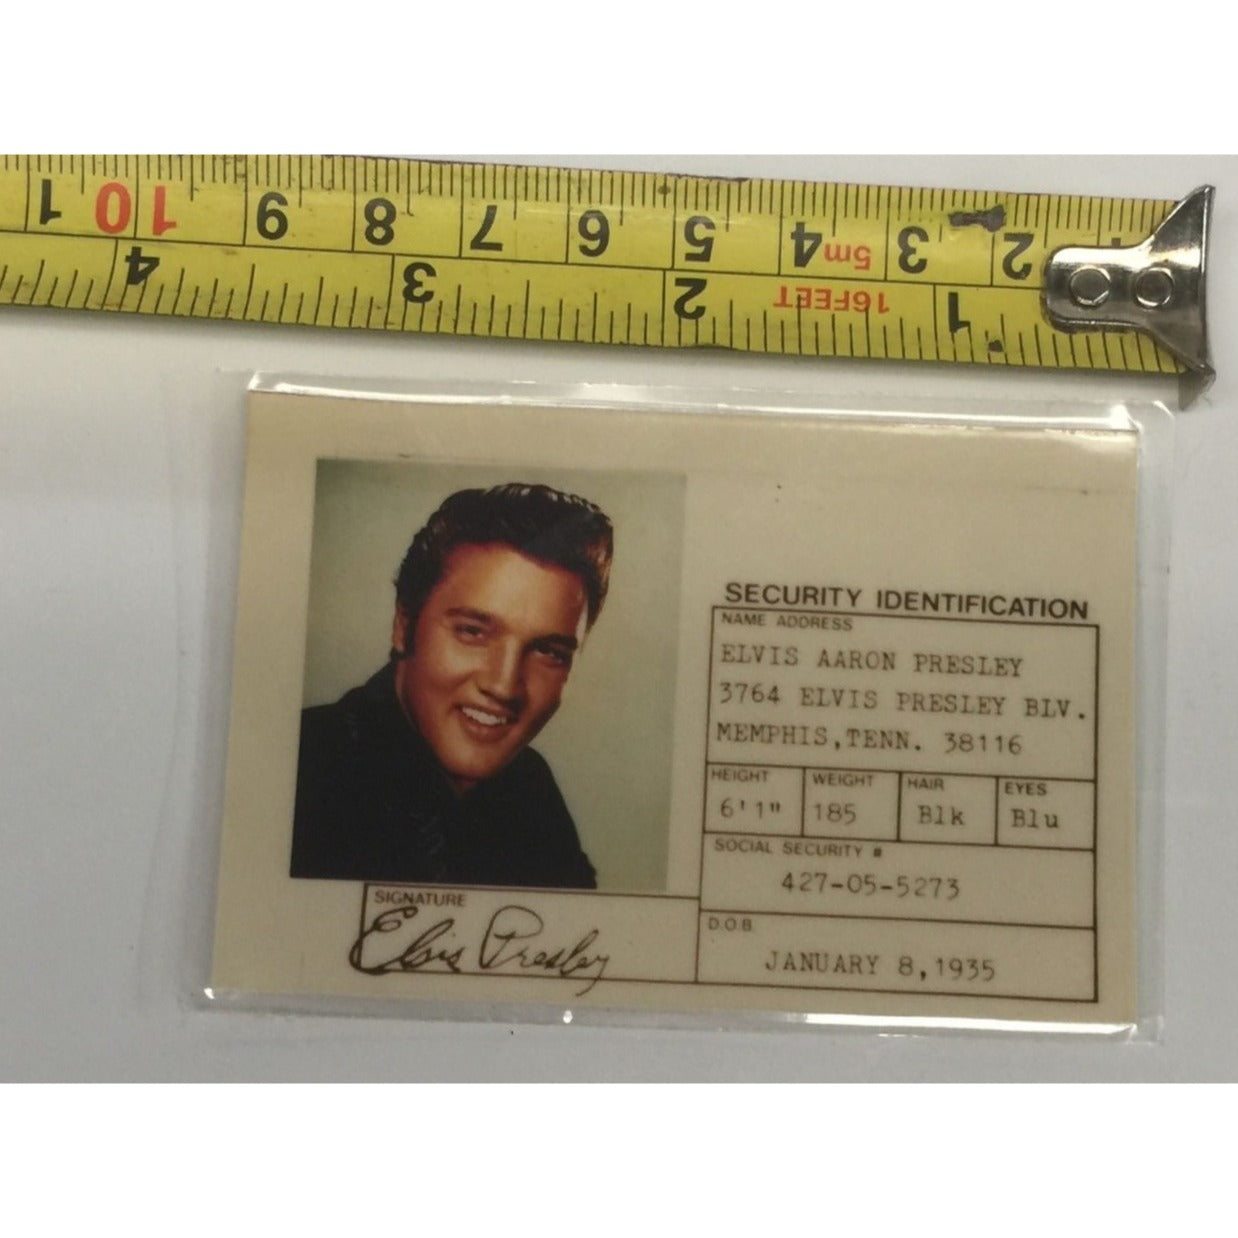 Elvis Presley Copy of Security Identification Souvenir Collectible- 3.5 inches by 2.5 inches